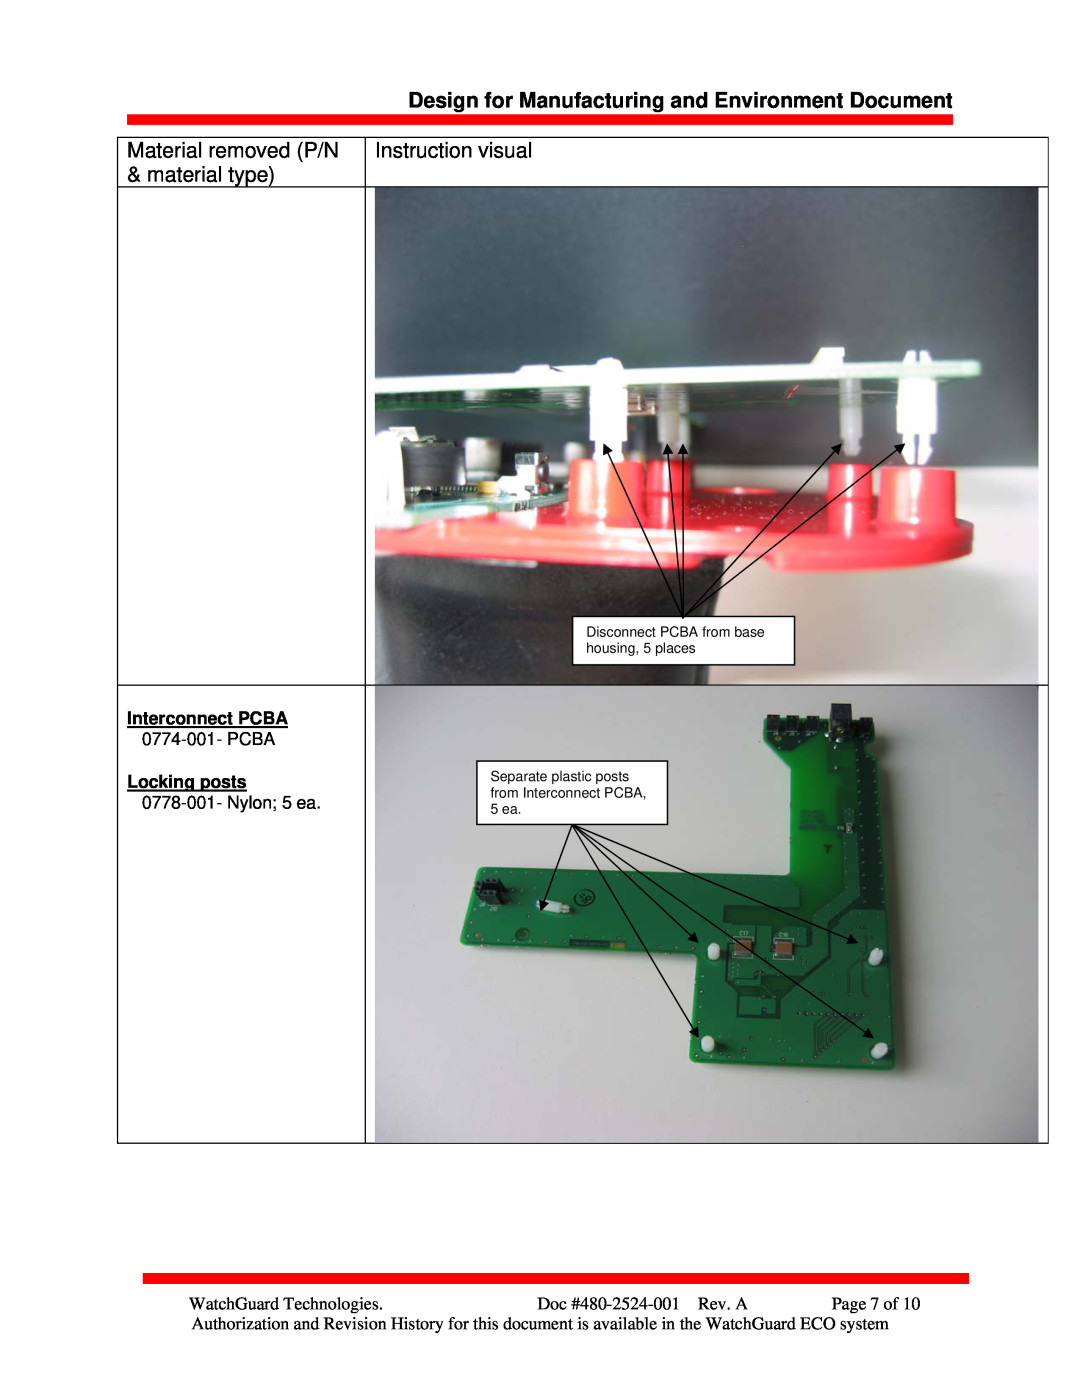 WatchGuard Technologies 480-2524-001 Interconnect PCBA, Locking posts, Design for Manufacturing and Environment Document 